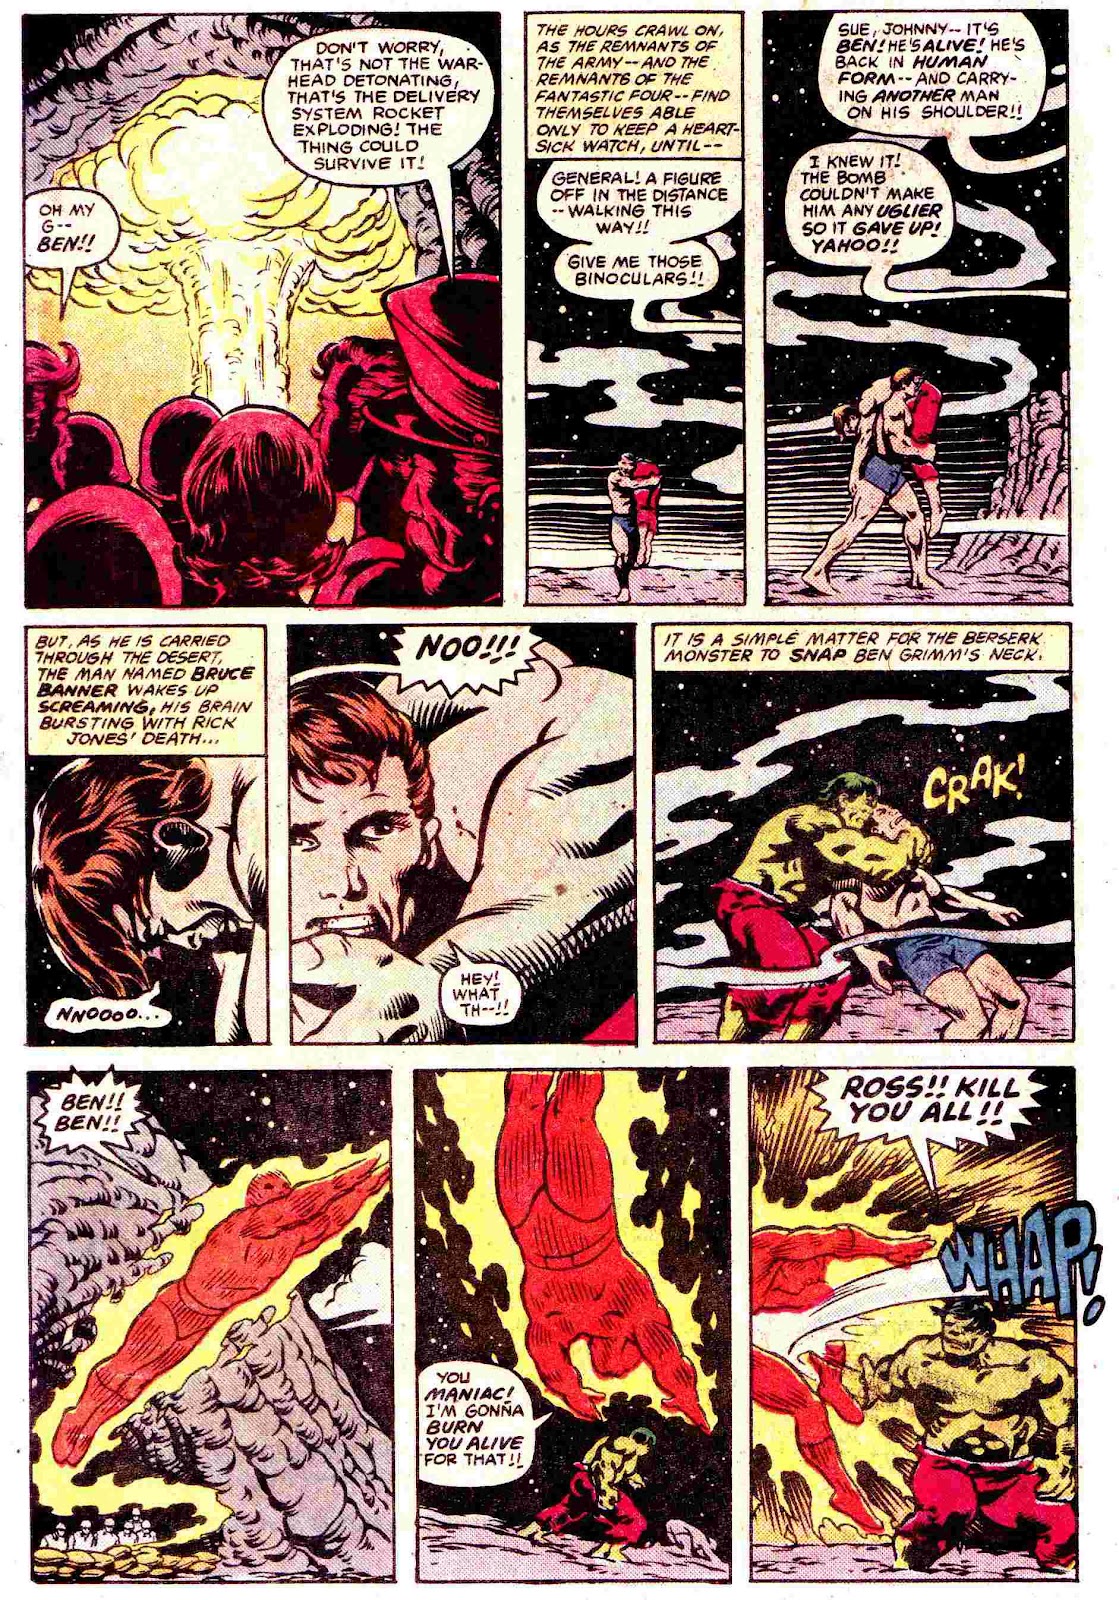 What If? (1977) issue 45 - The Hulk went Berserk - Page 35